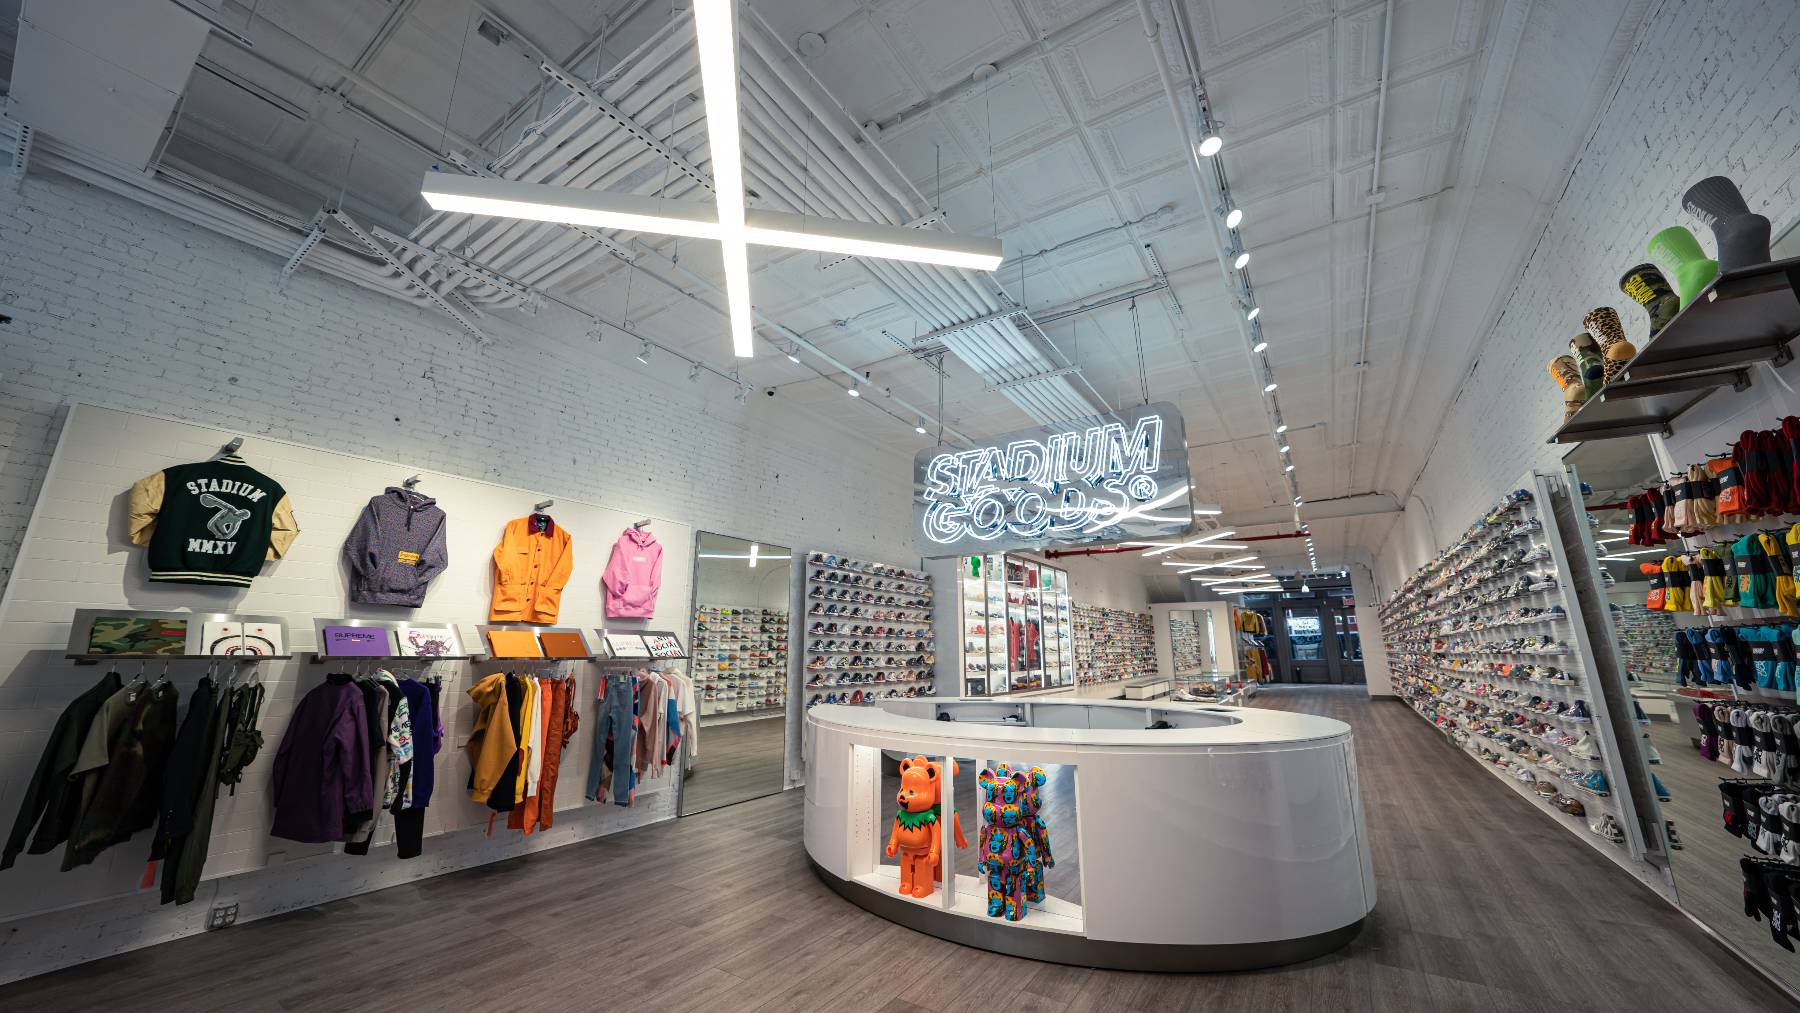 A shot of the sneaker-filled interior of Stadium Goods.